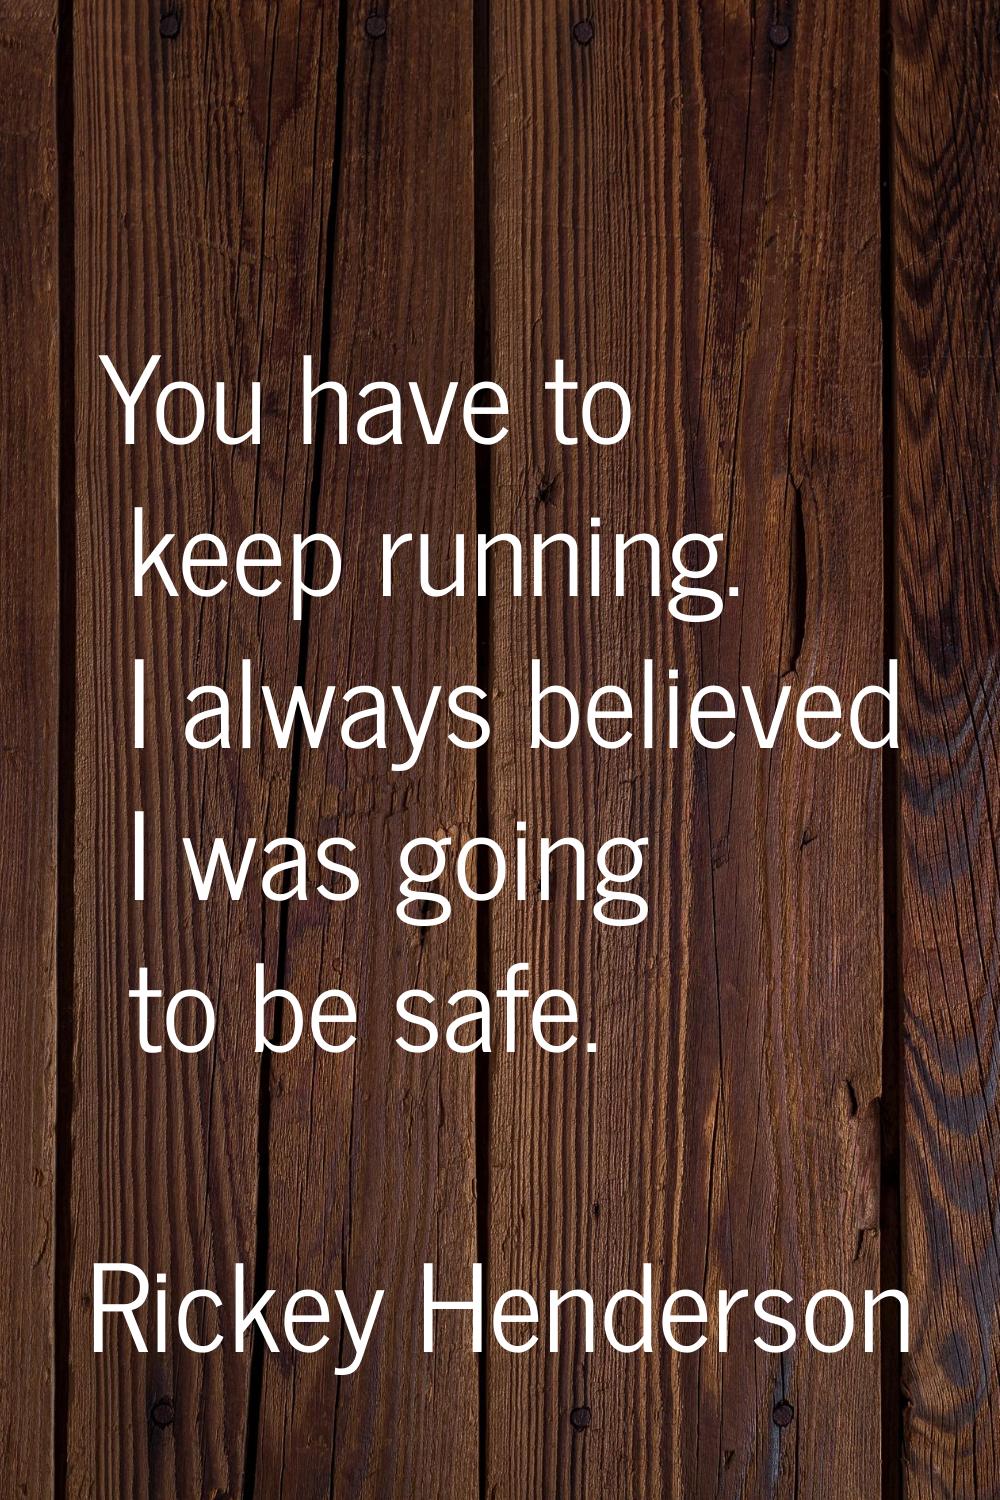 You have to keep running. I always believed I was going to be safe.